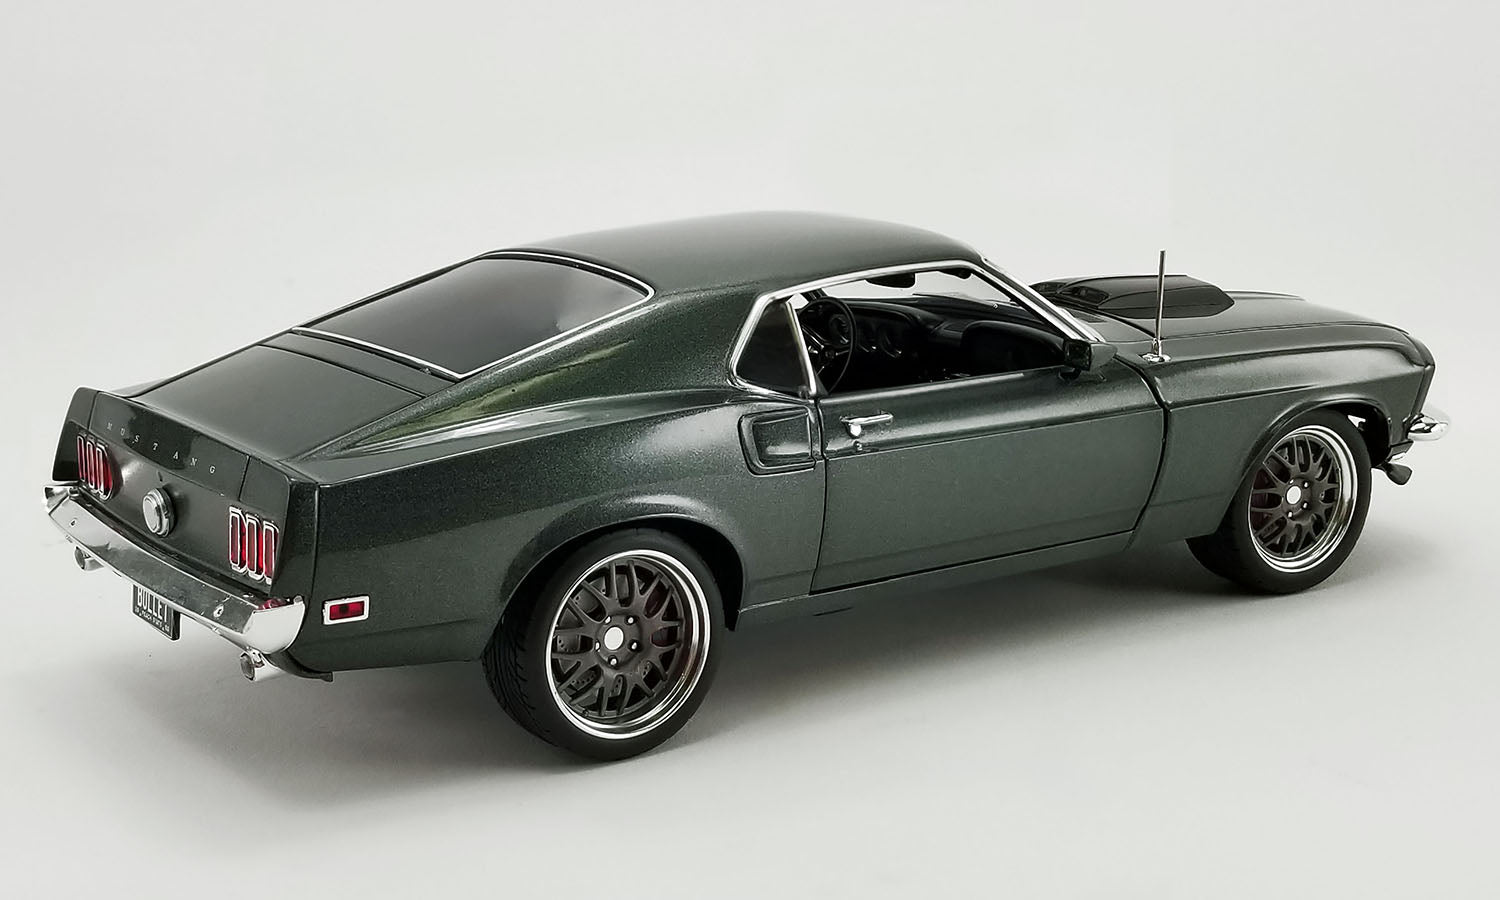 1969 Ford Mustang Bullet Edition 1:18 Acme – Desktop Muscle Cars Inc.